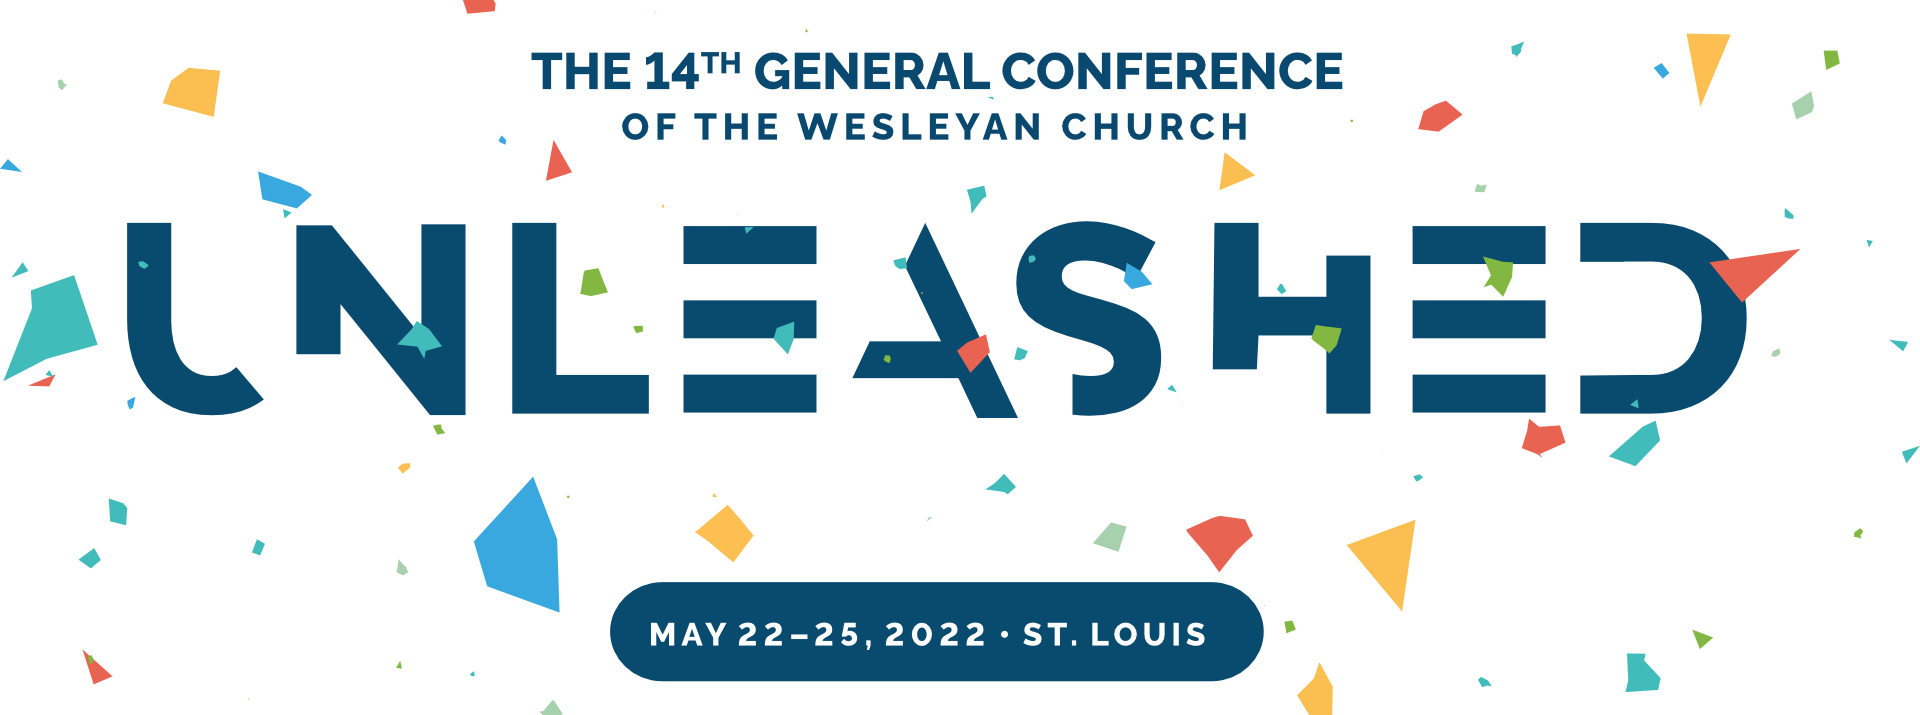 Unleashed Logo The 14th General Conference of the Wesleyan Church, May 22-25, 2022 - St. Louis